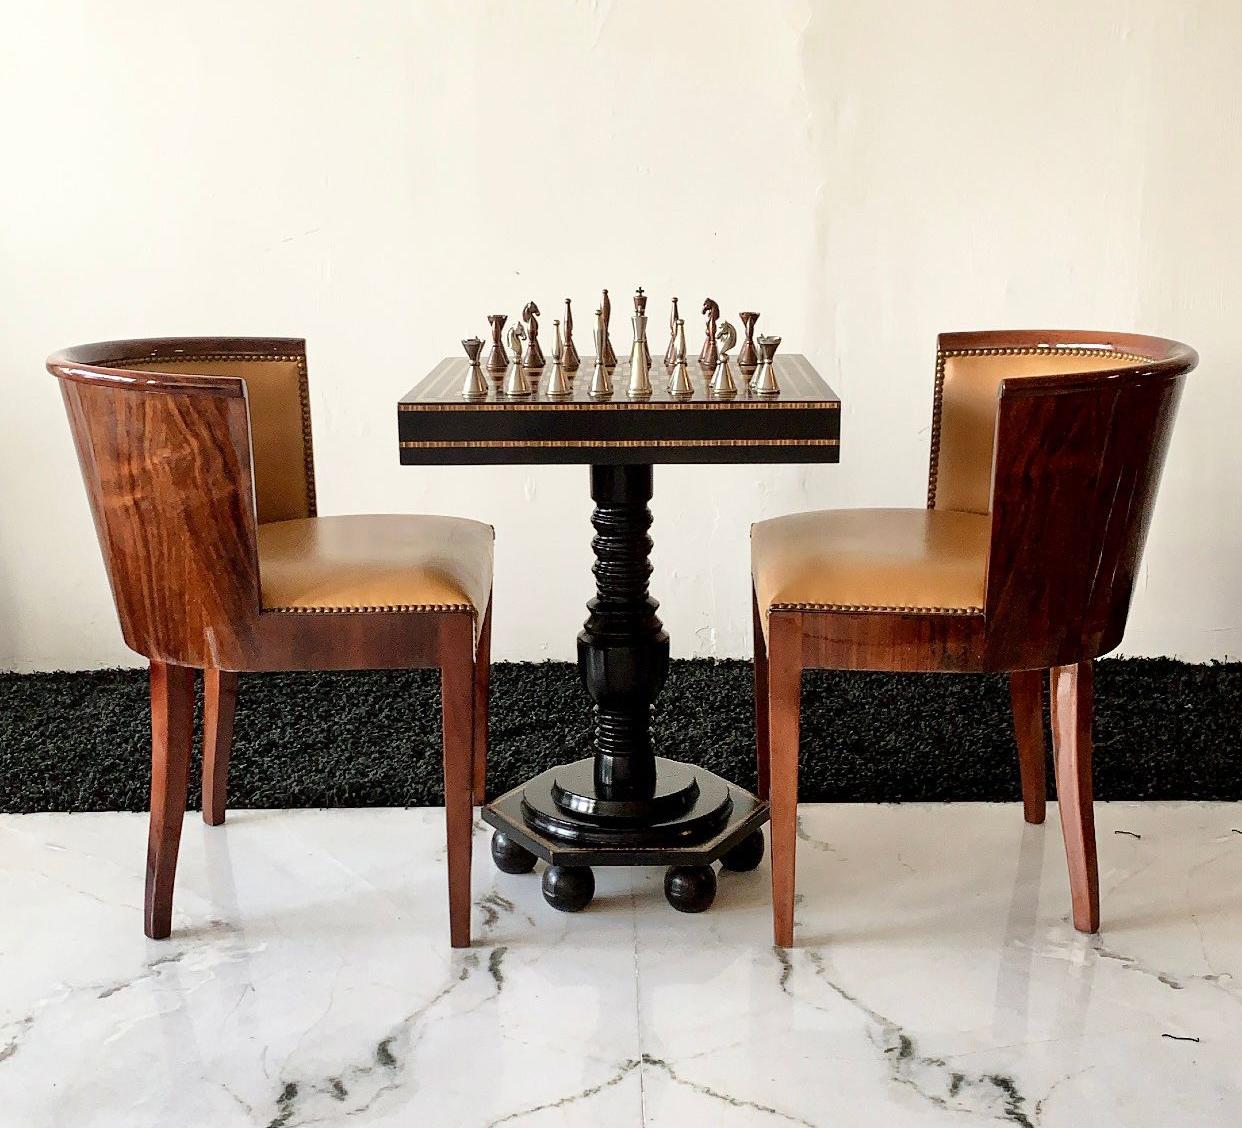 This art deco game table is simply stunning. This piece came from an estate in Ojai with its own vineyard that was furnished with the most magnificent French art deco pieces I've ever seen. This vintage game table is ebonized black with multiple